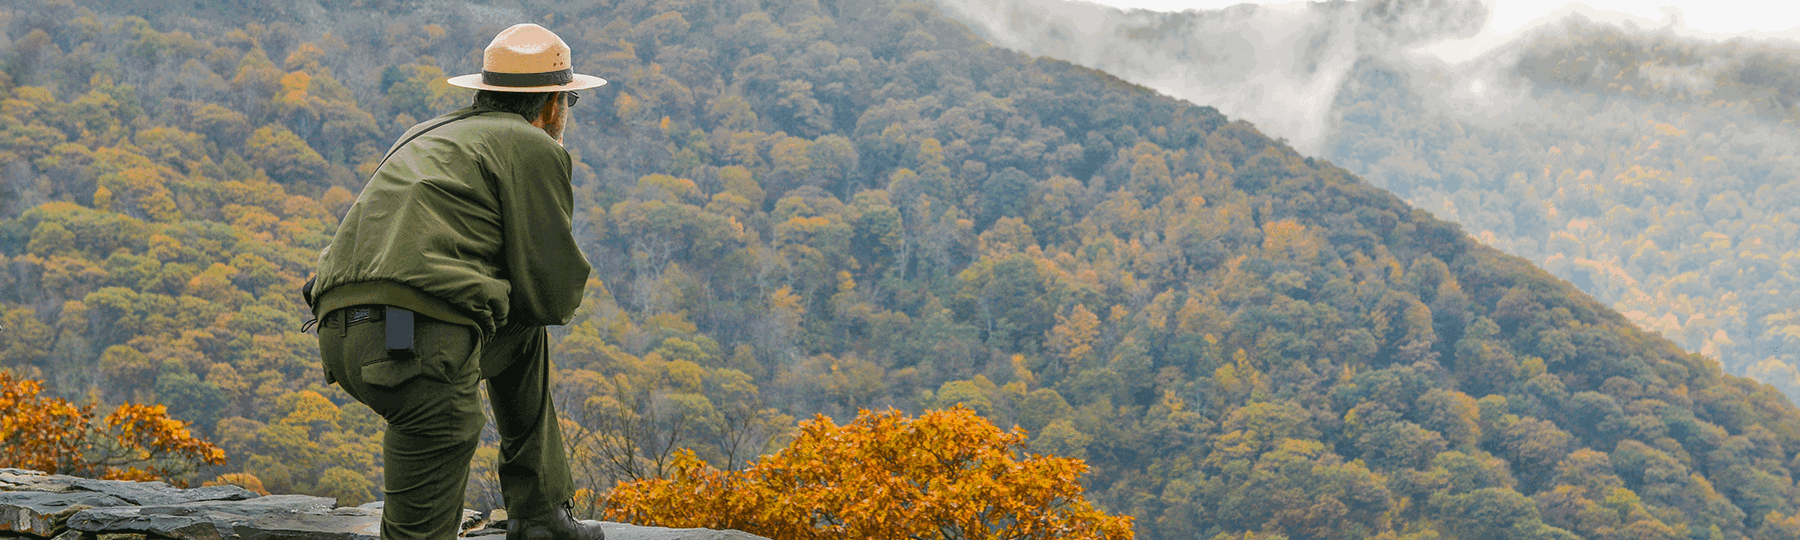 Man wearing a hat looking out into a mountainous range of colorful trees.